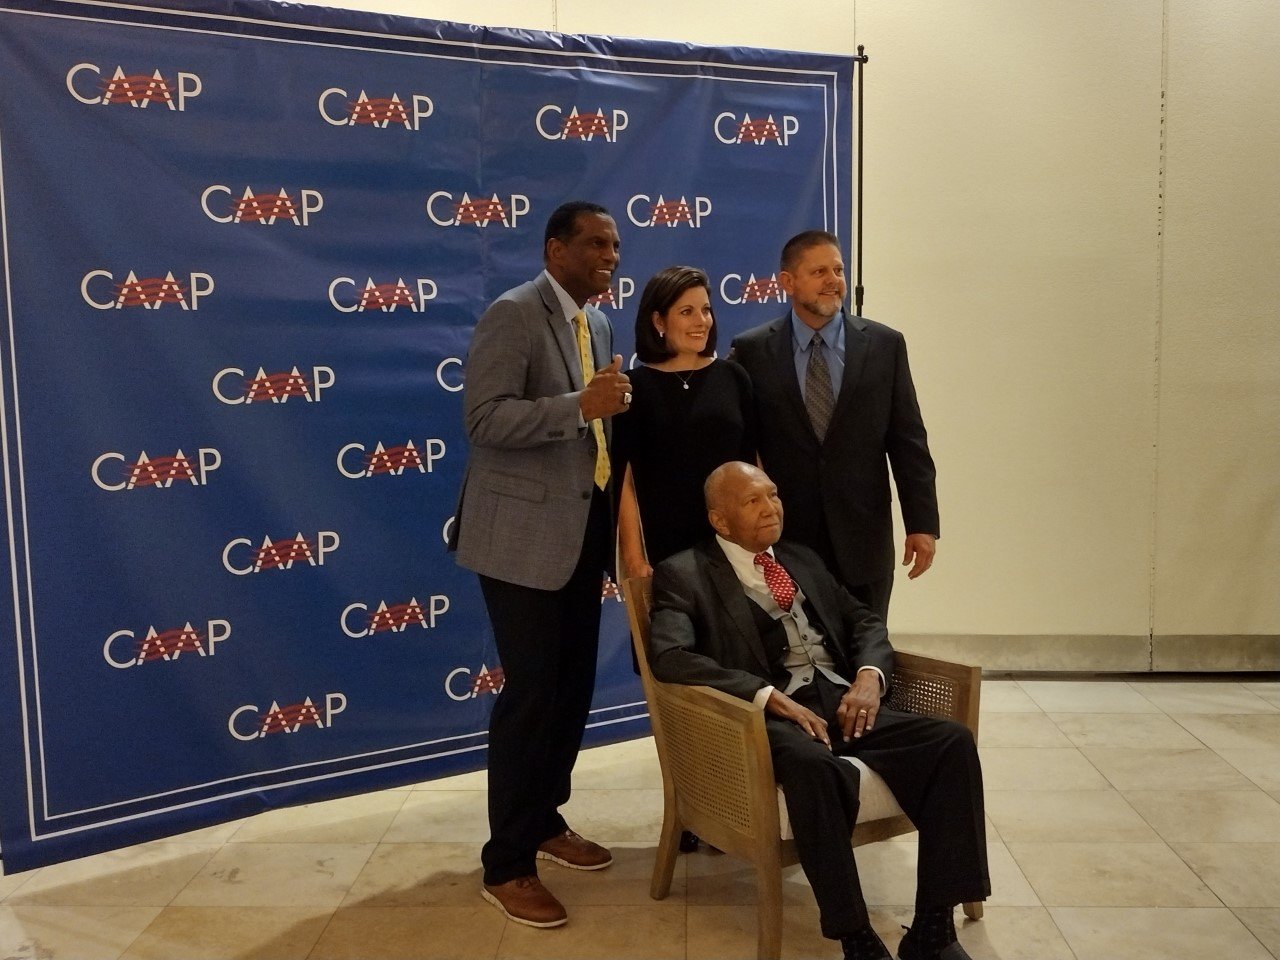 The Coalition for Americans and Principles (CAAP) held its annual gala Sept. 14 at the Palacio Maria Event Center, 21728 Highland Knolls. U.S. Rep. Burgess Owens, R-Utah, standing at left, was the special guest. Also pictured are Tricia and Ed Krenek, a local attorney who is seeking election as judge for the 240th District Court. Tricia Krenek is  a candidate for Fort Bend County Justice of the Peace Pct. 1, Place 2. Rev. Bill Owens, who along with his wife Dr. Deborah Owens leads CAAP, is seated.